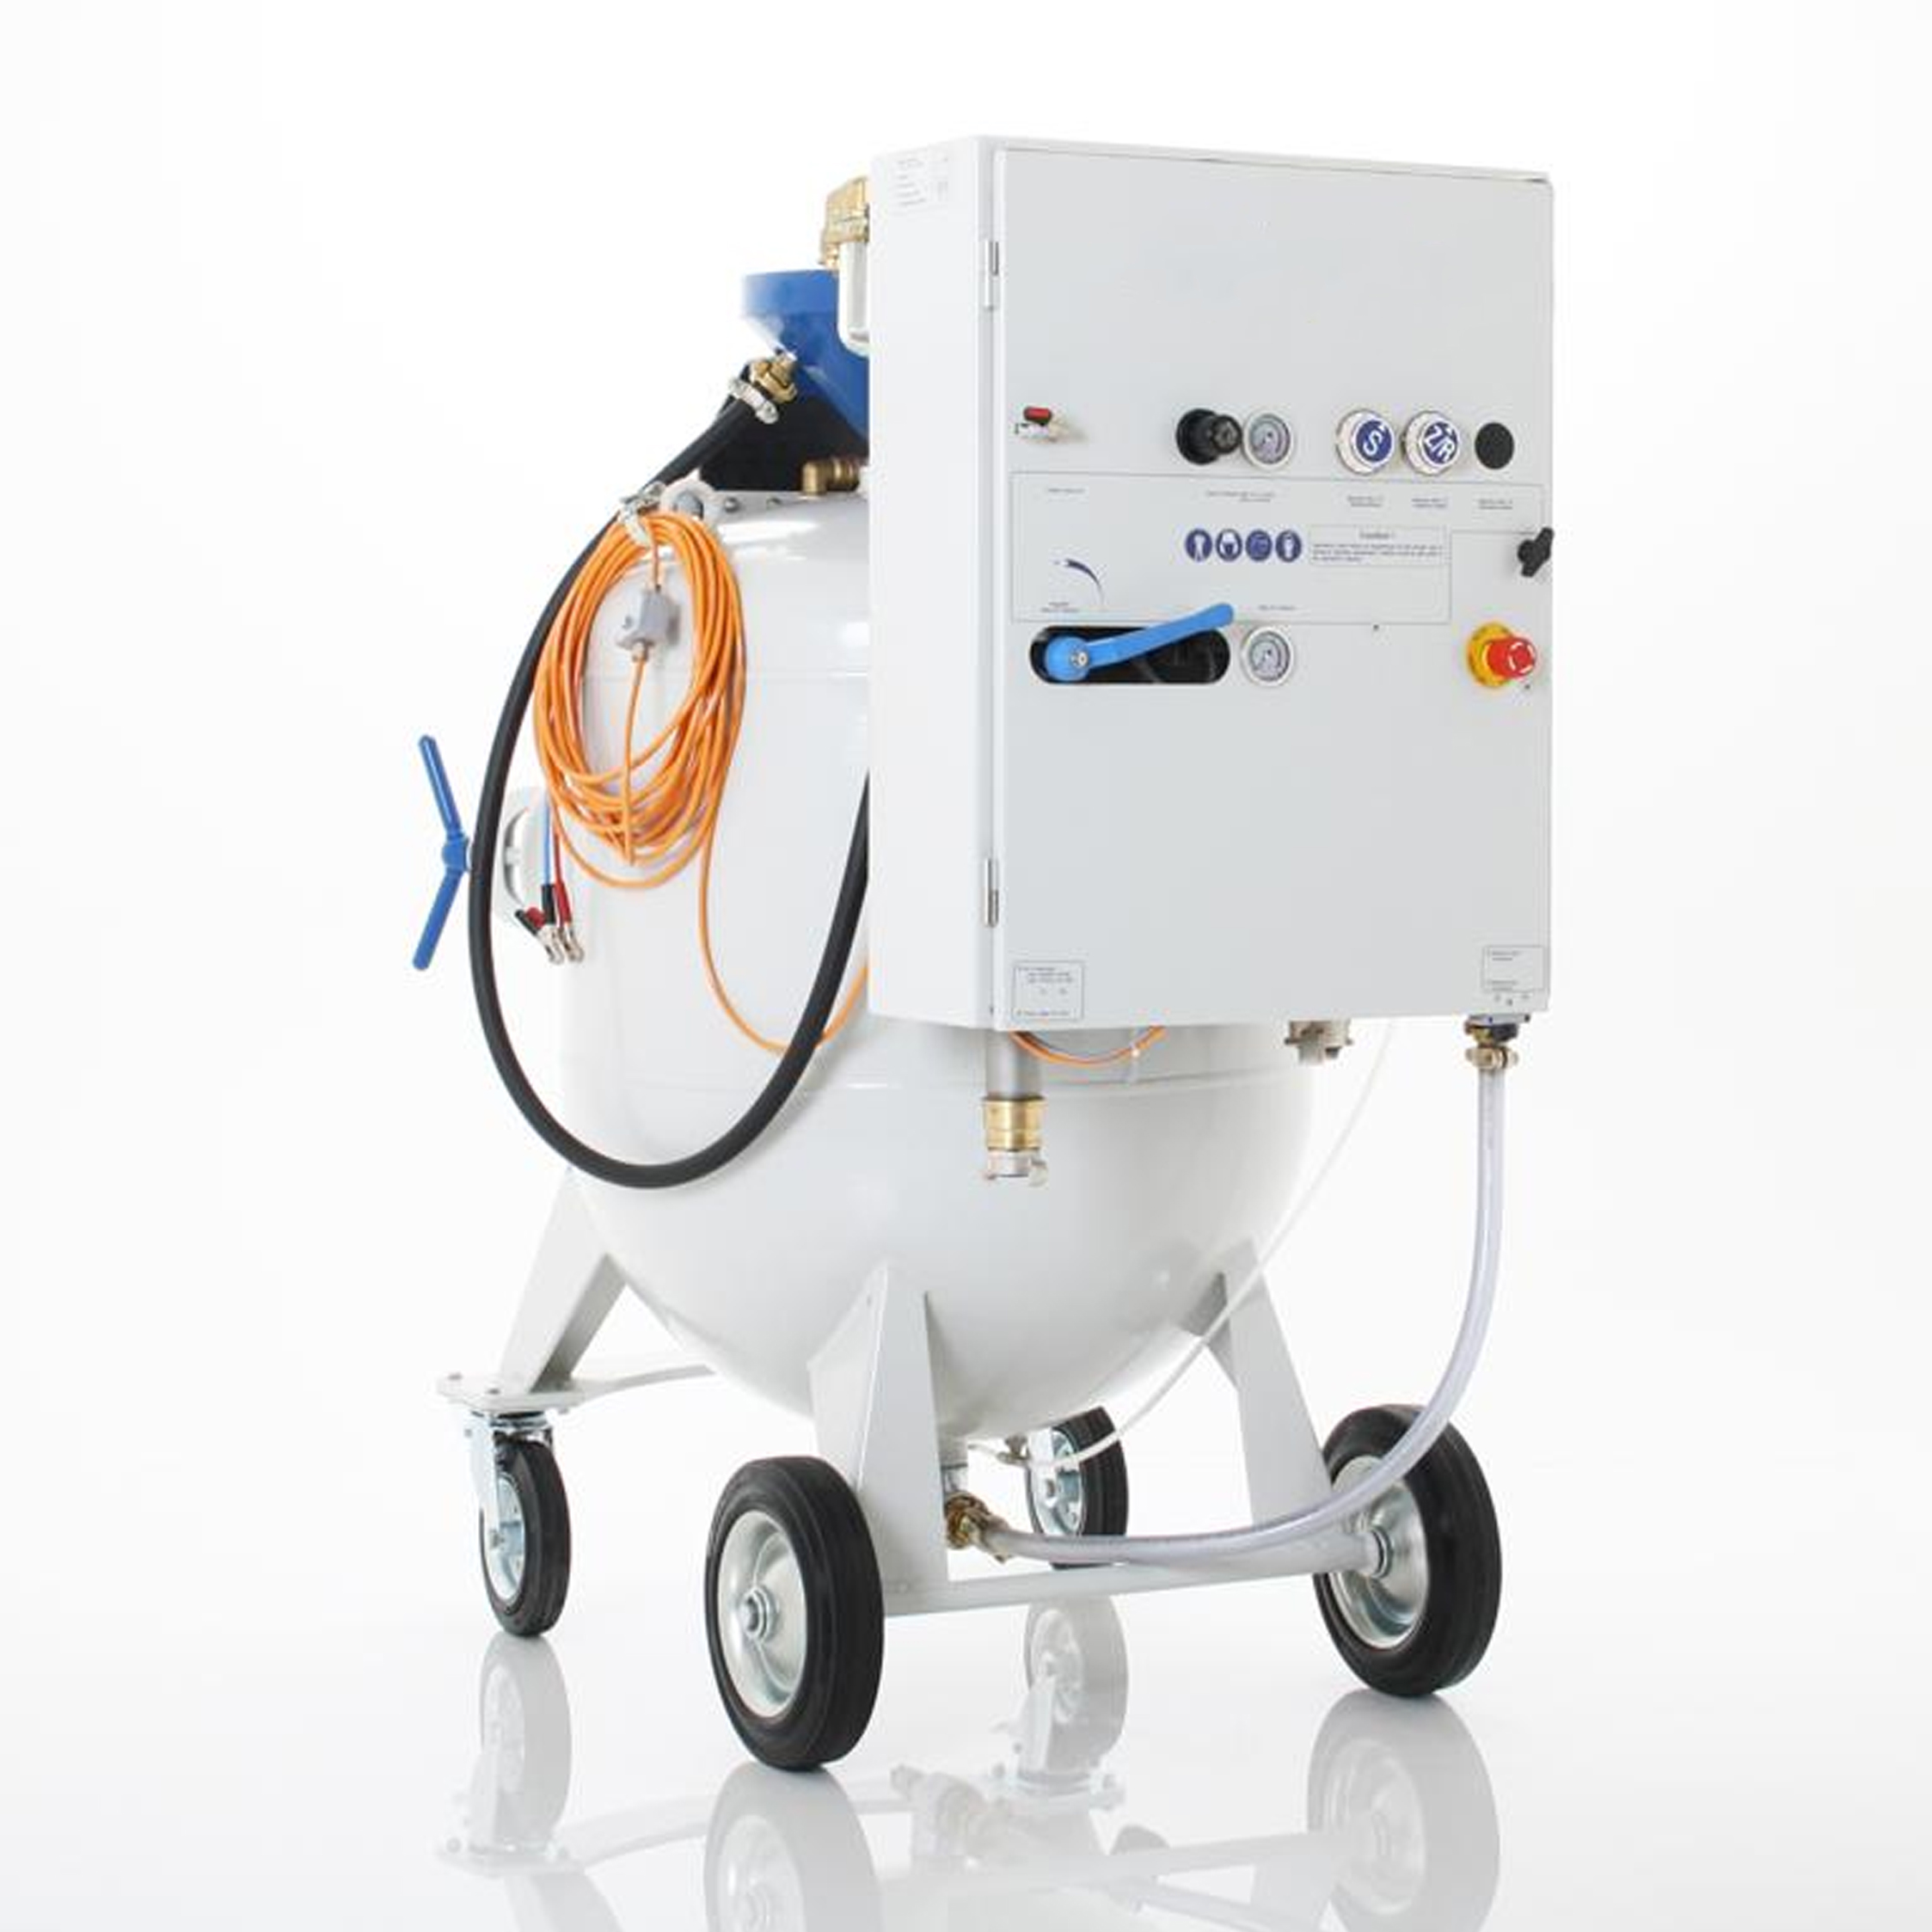 Torbo Blaster : Dust-Free Vapour Blasting. Efficient, Clean, and Advanced. Ideal for Multiple Industries.